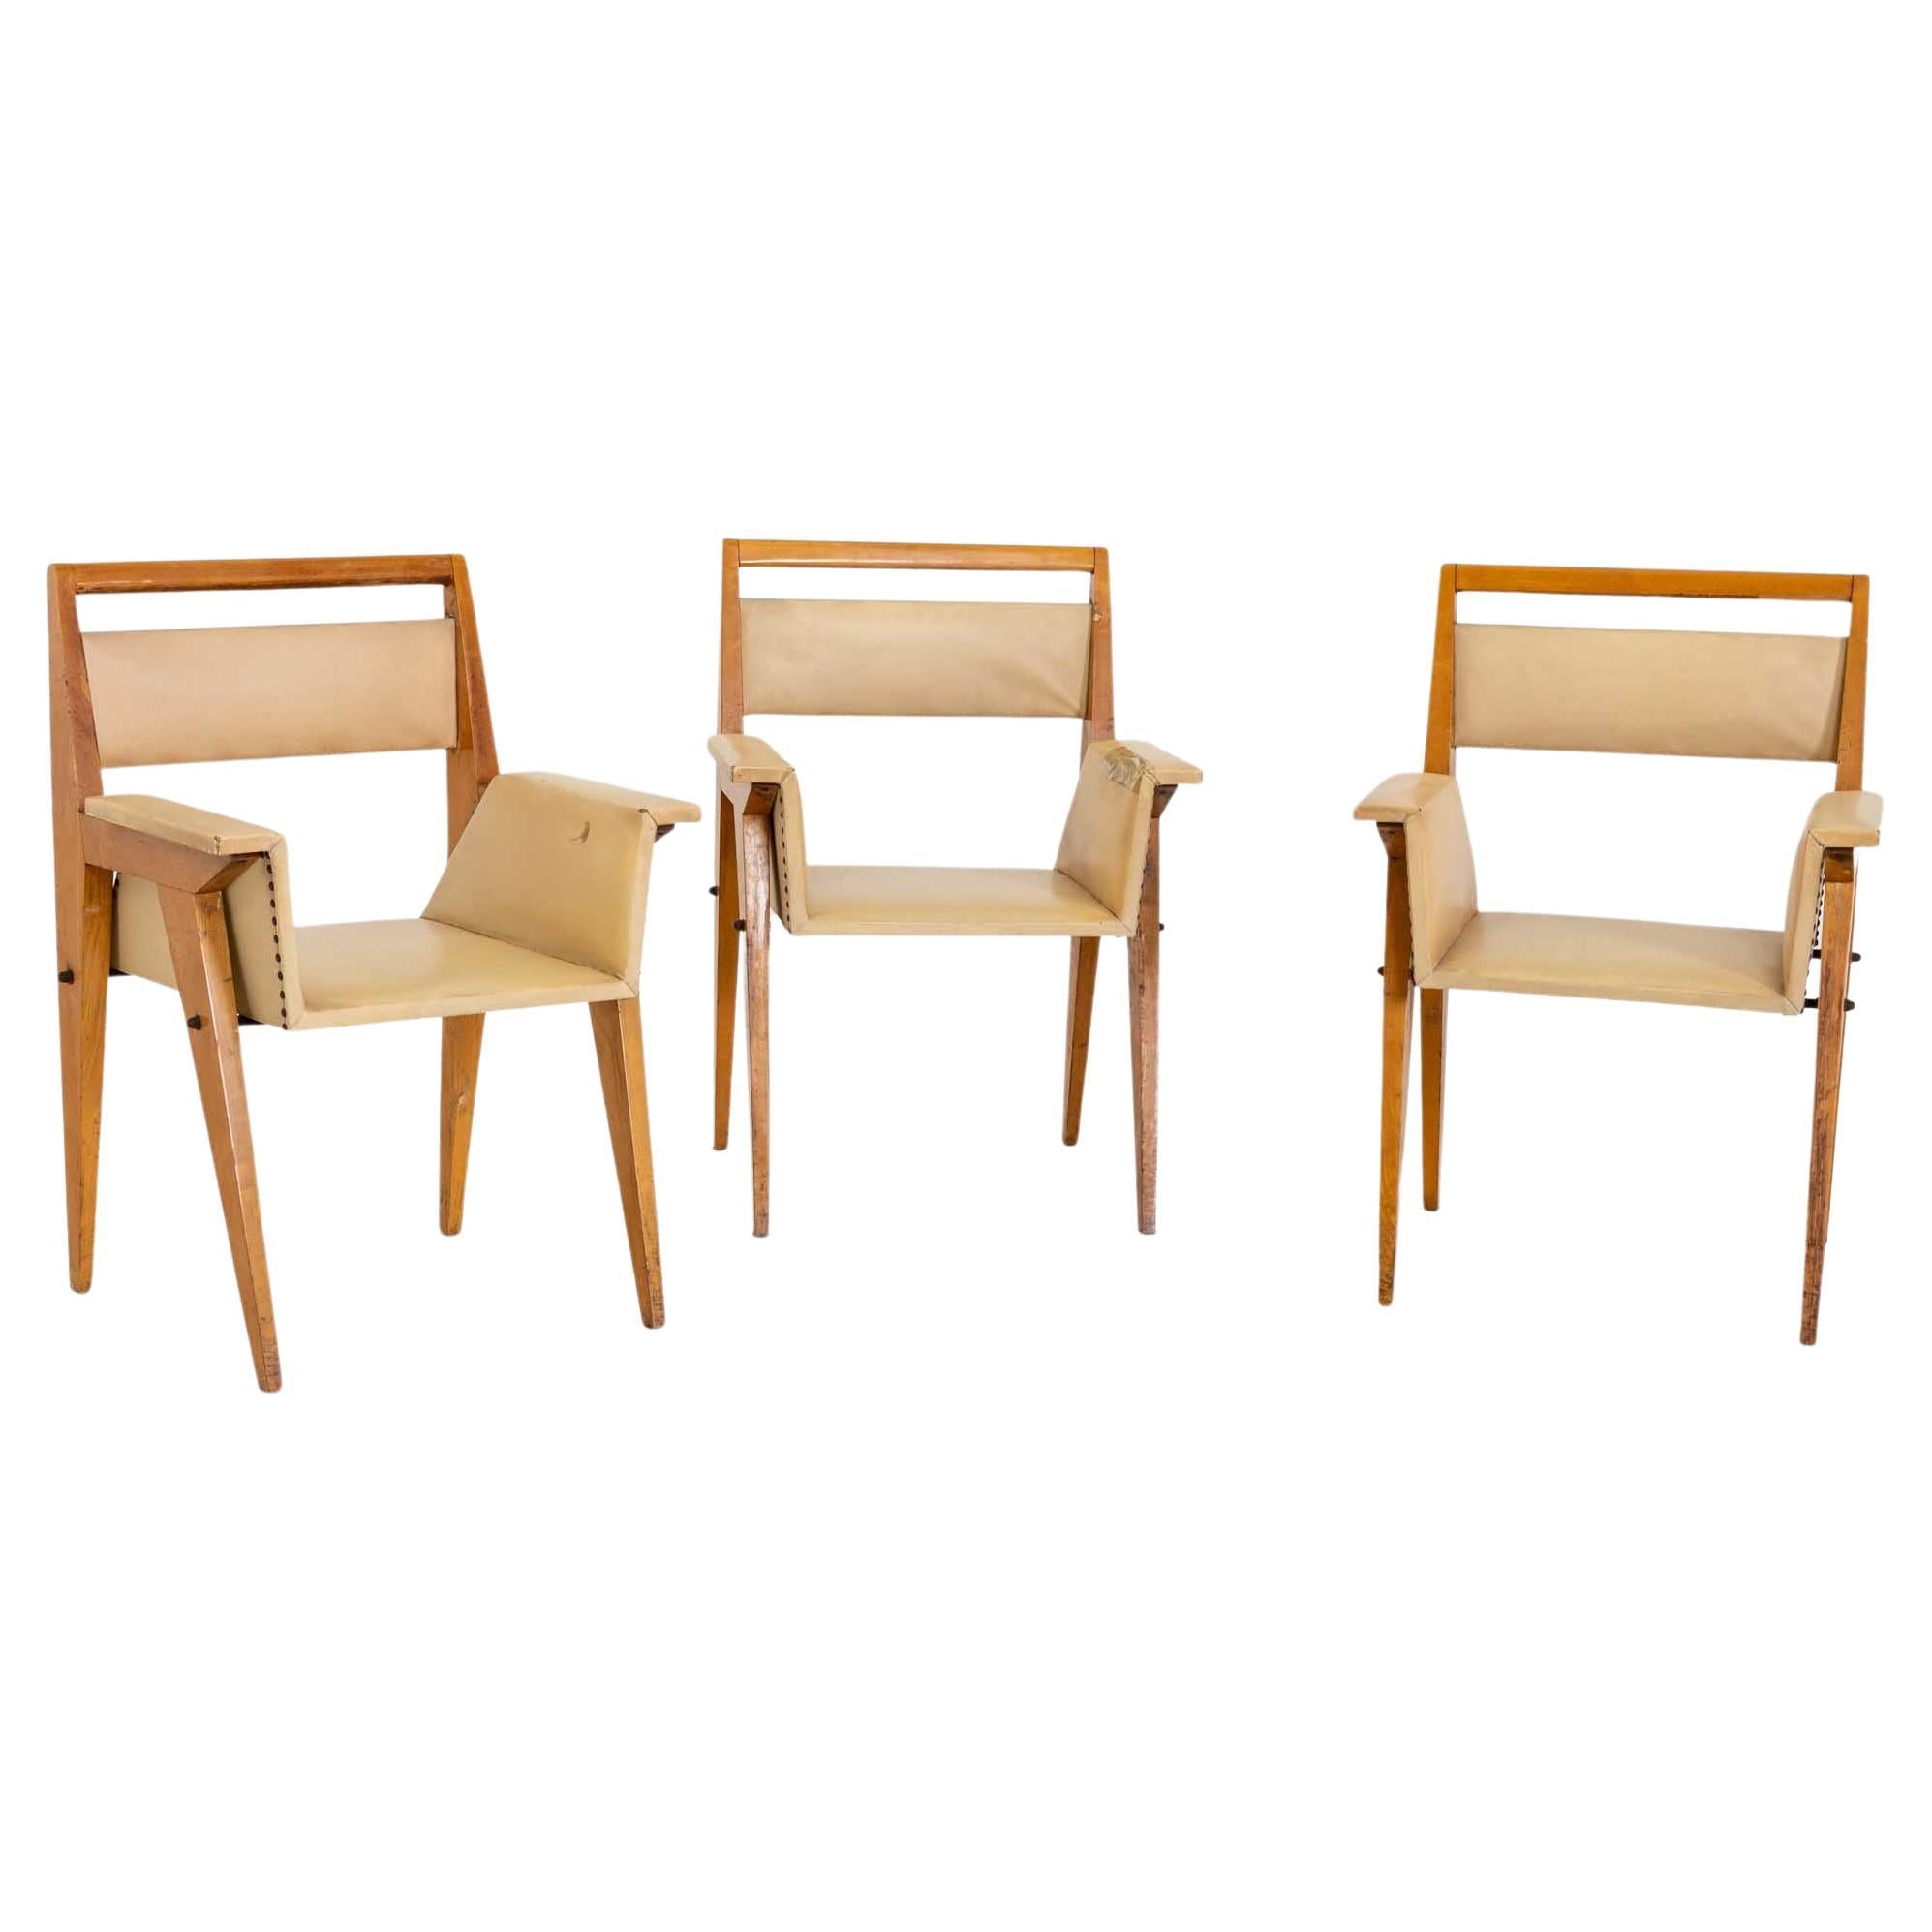 Armchairs, Designed by Vittorio Armellini, Italy Mid-20th Century